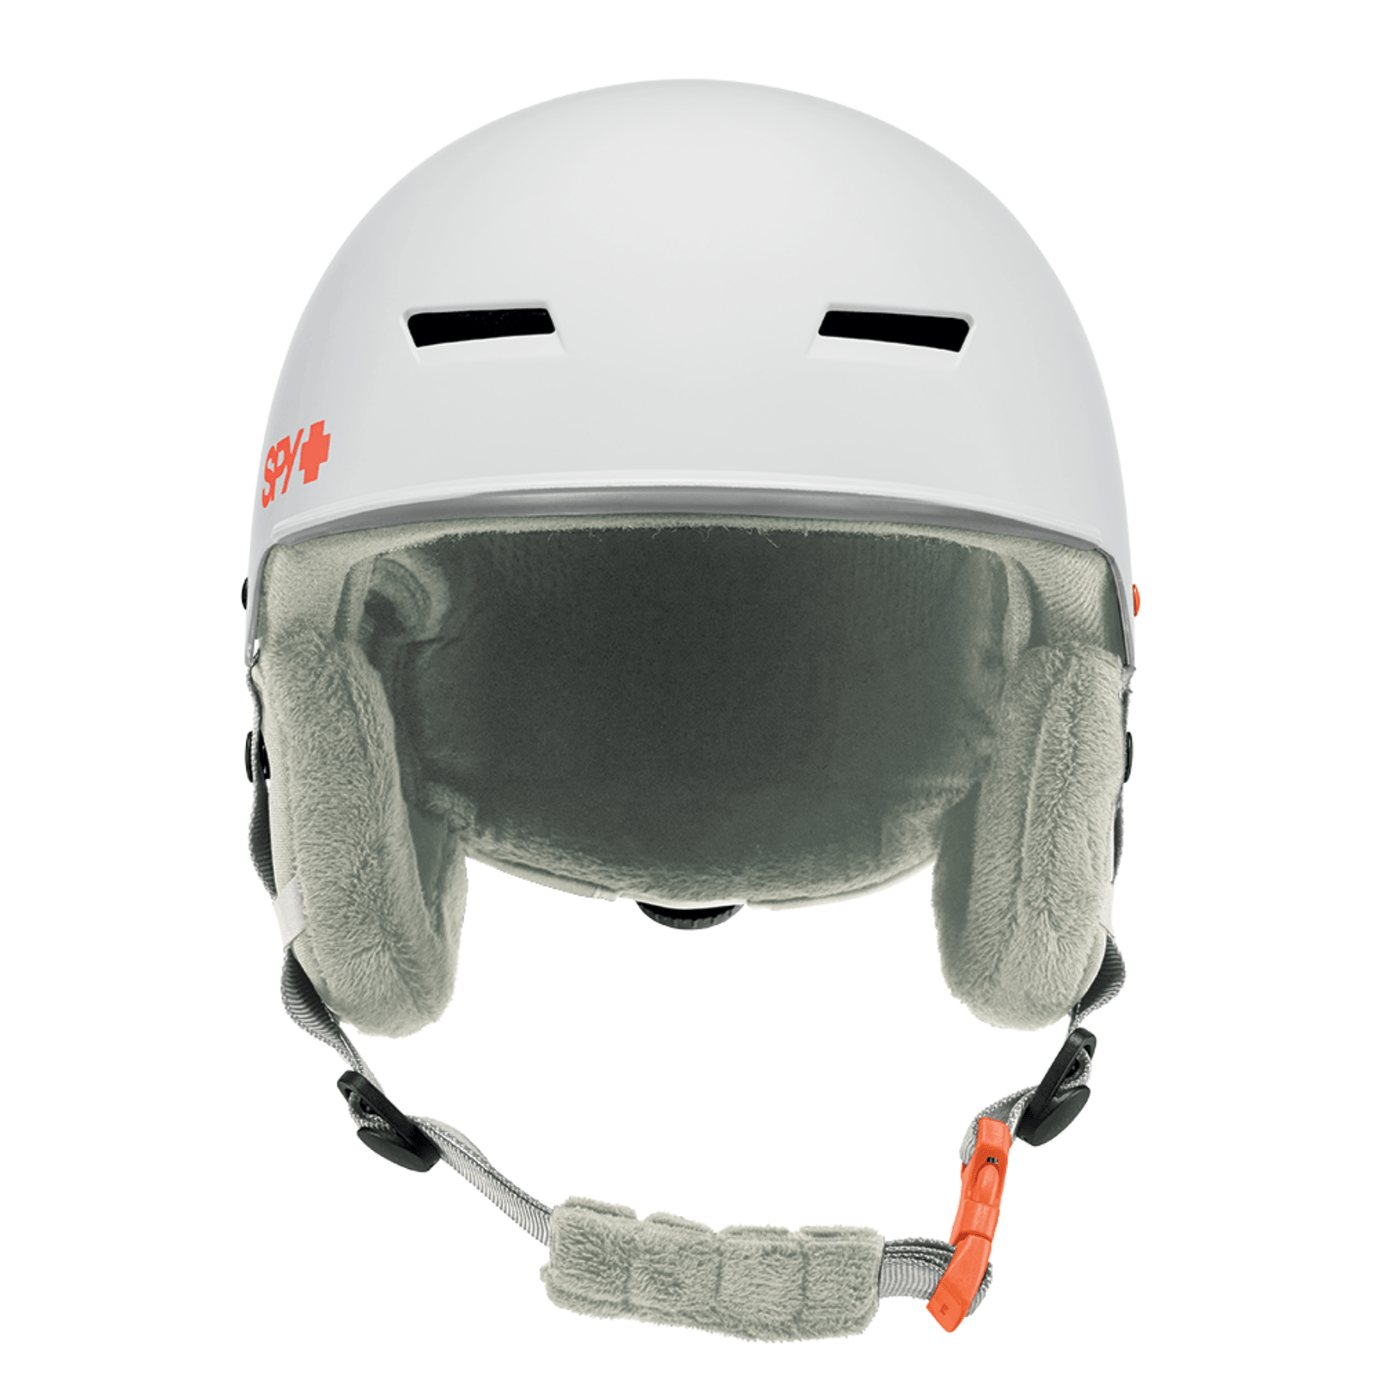 SPY Galactic MIPS Snow Helmet Matte White - Light Gray 8Lines Shop - Fast Shipping